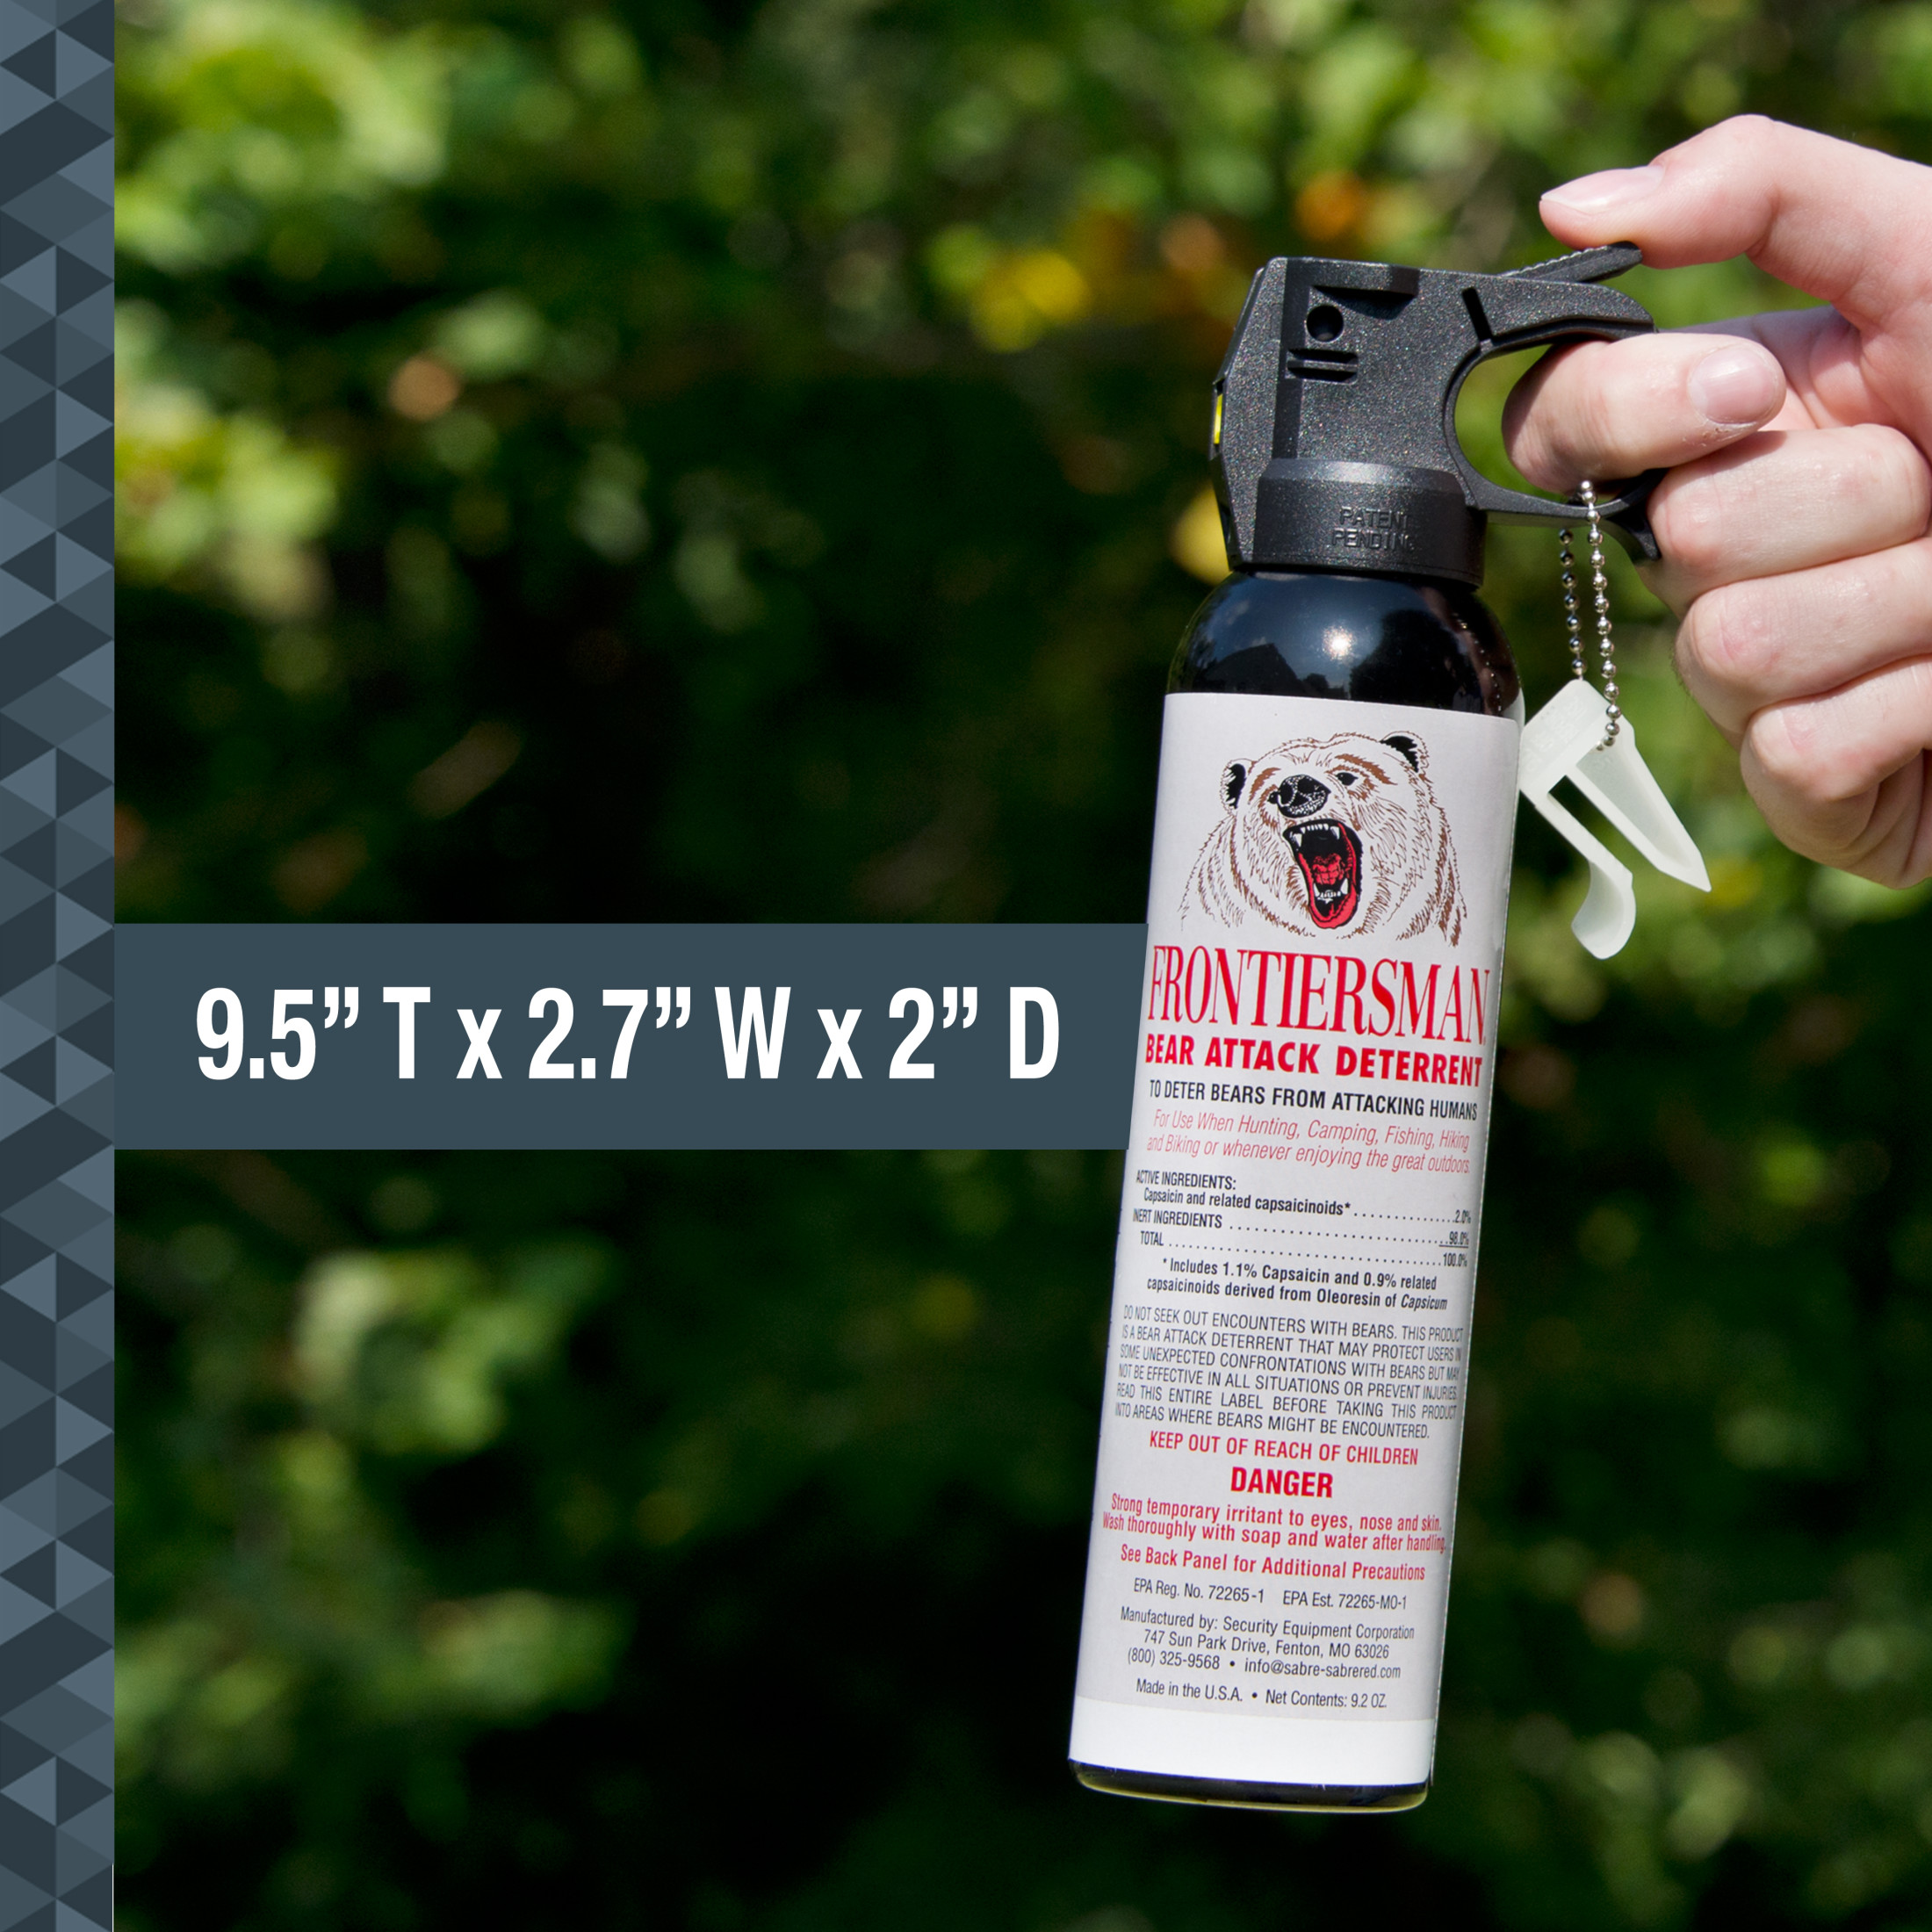 SABRE Frontiersman 9.2 Ounce Bear Spray Deterrent, 35-Foot Range, White, 9.5 in. - image 5 of 9